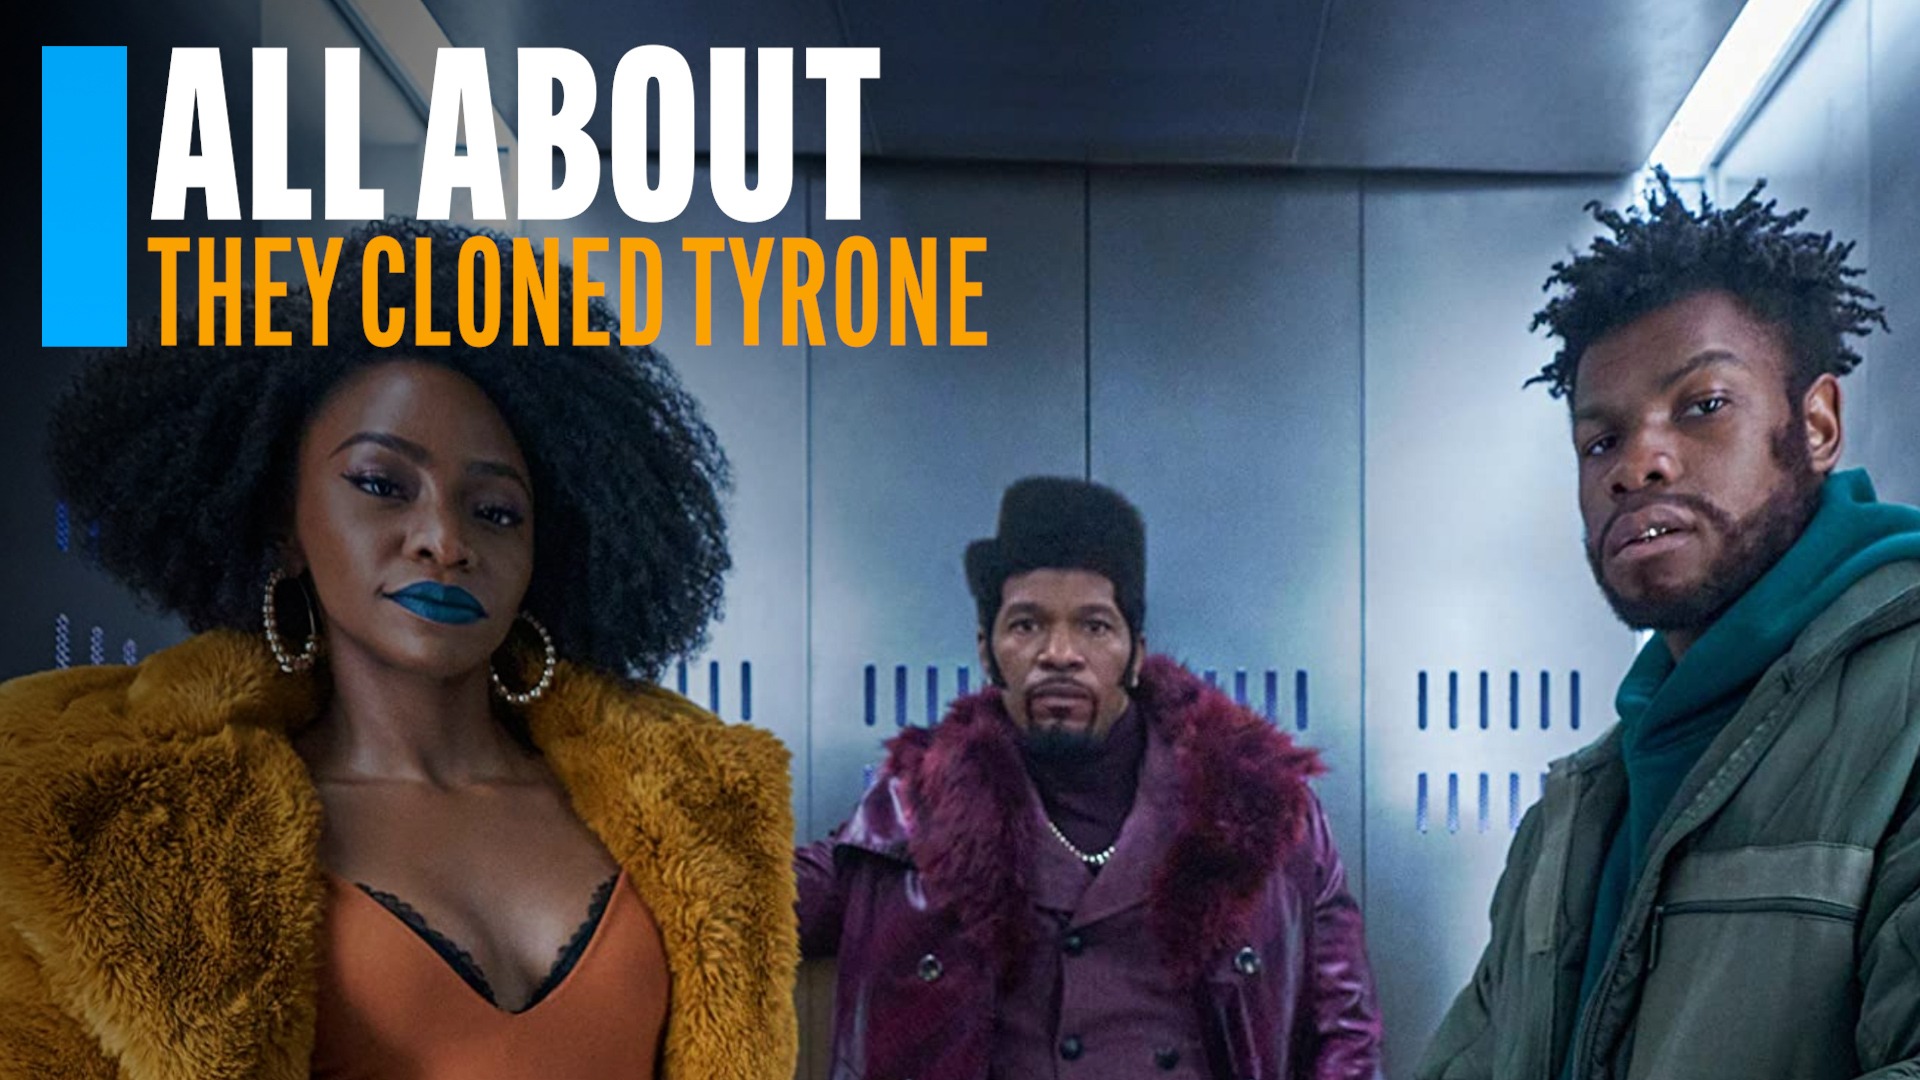 “They Cloned Tyrone” – A Mind-Bending Sci-Fi Comedy